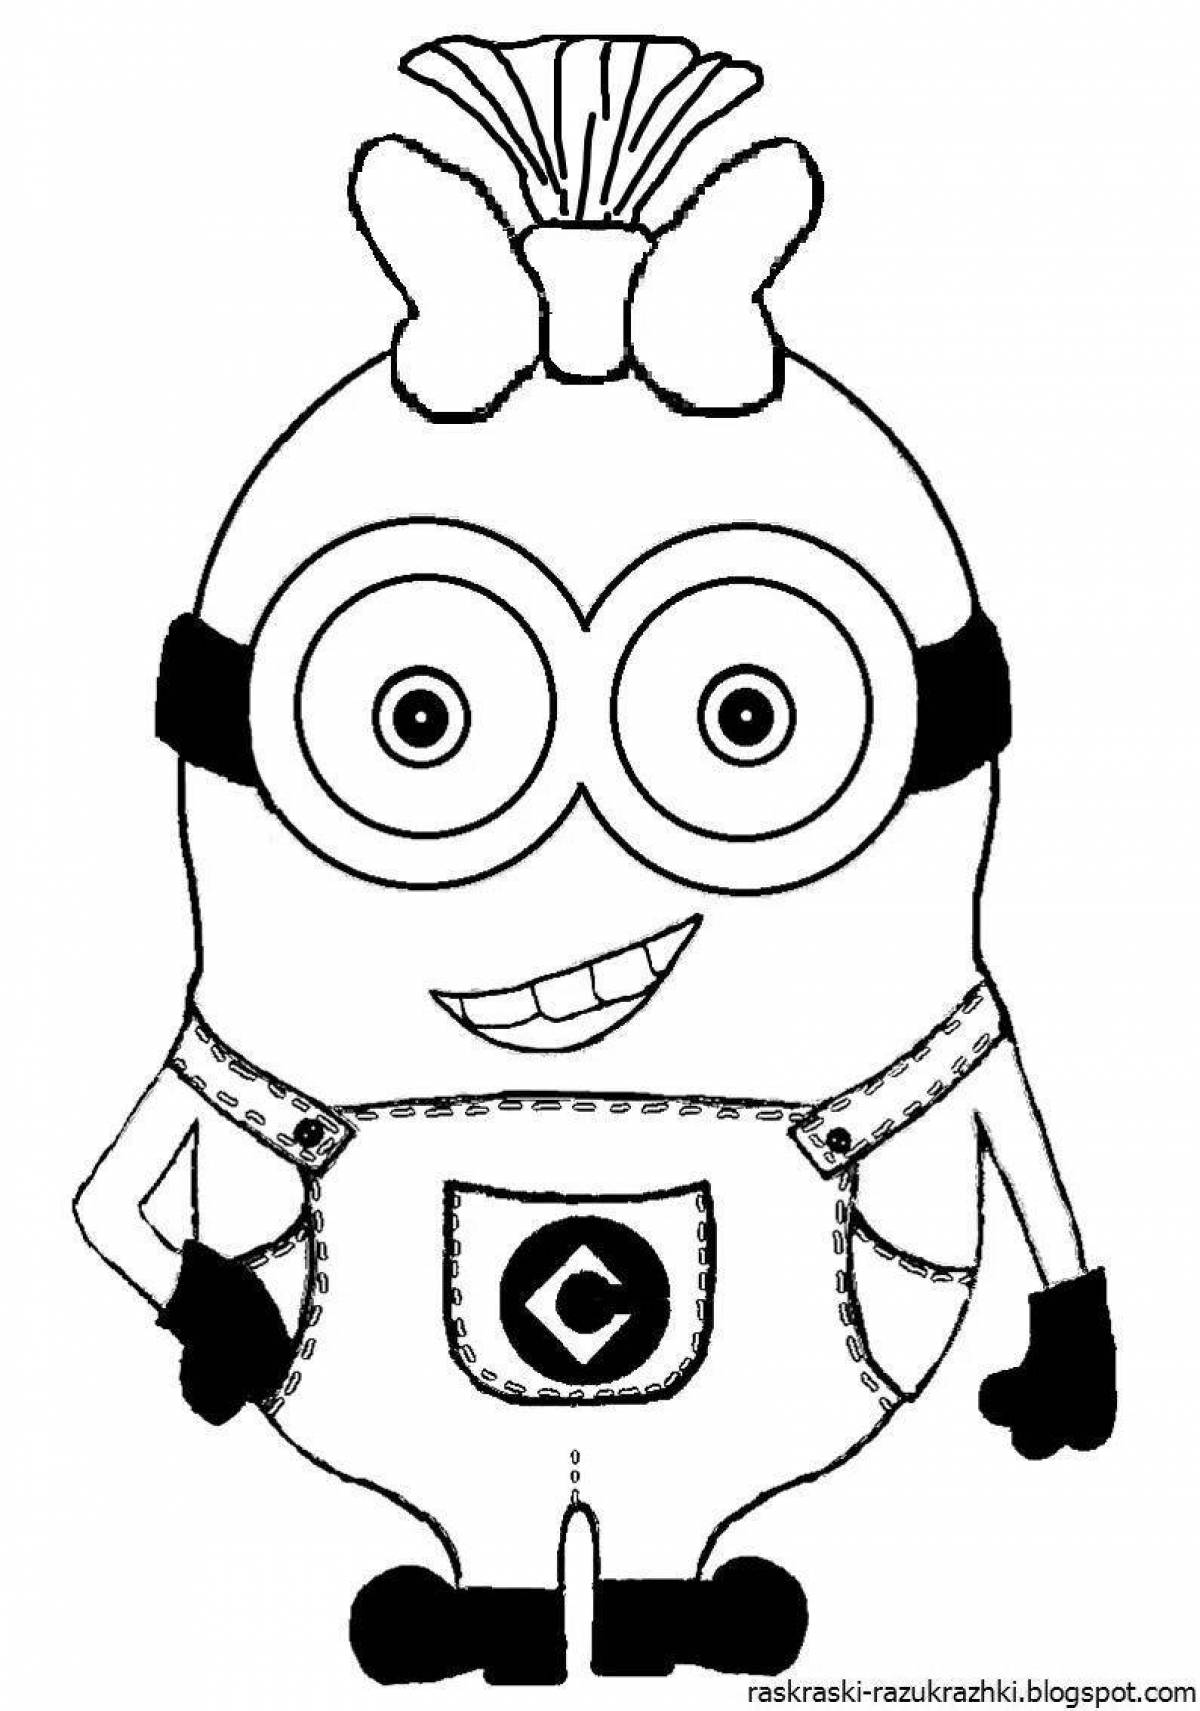 Fun coloring of minions for girls